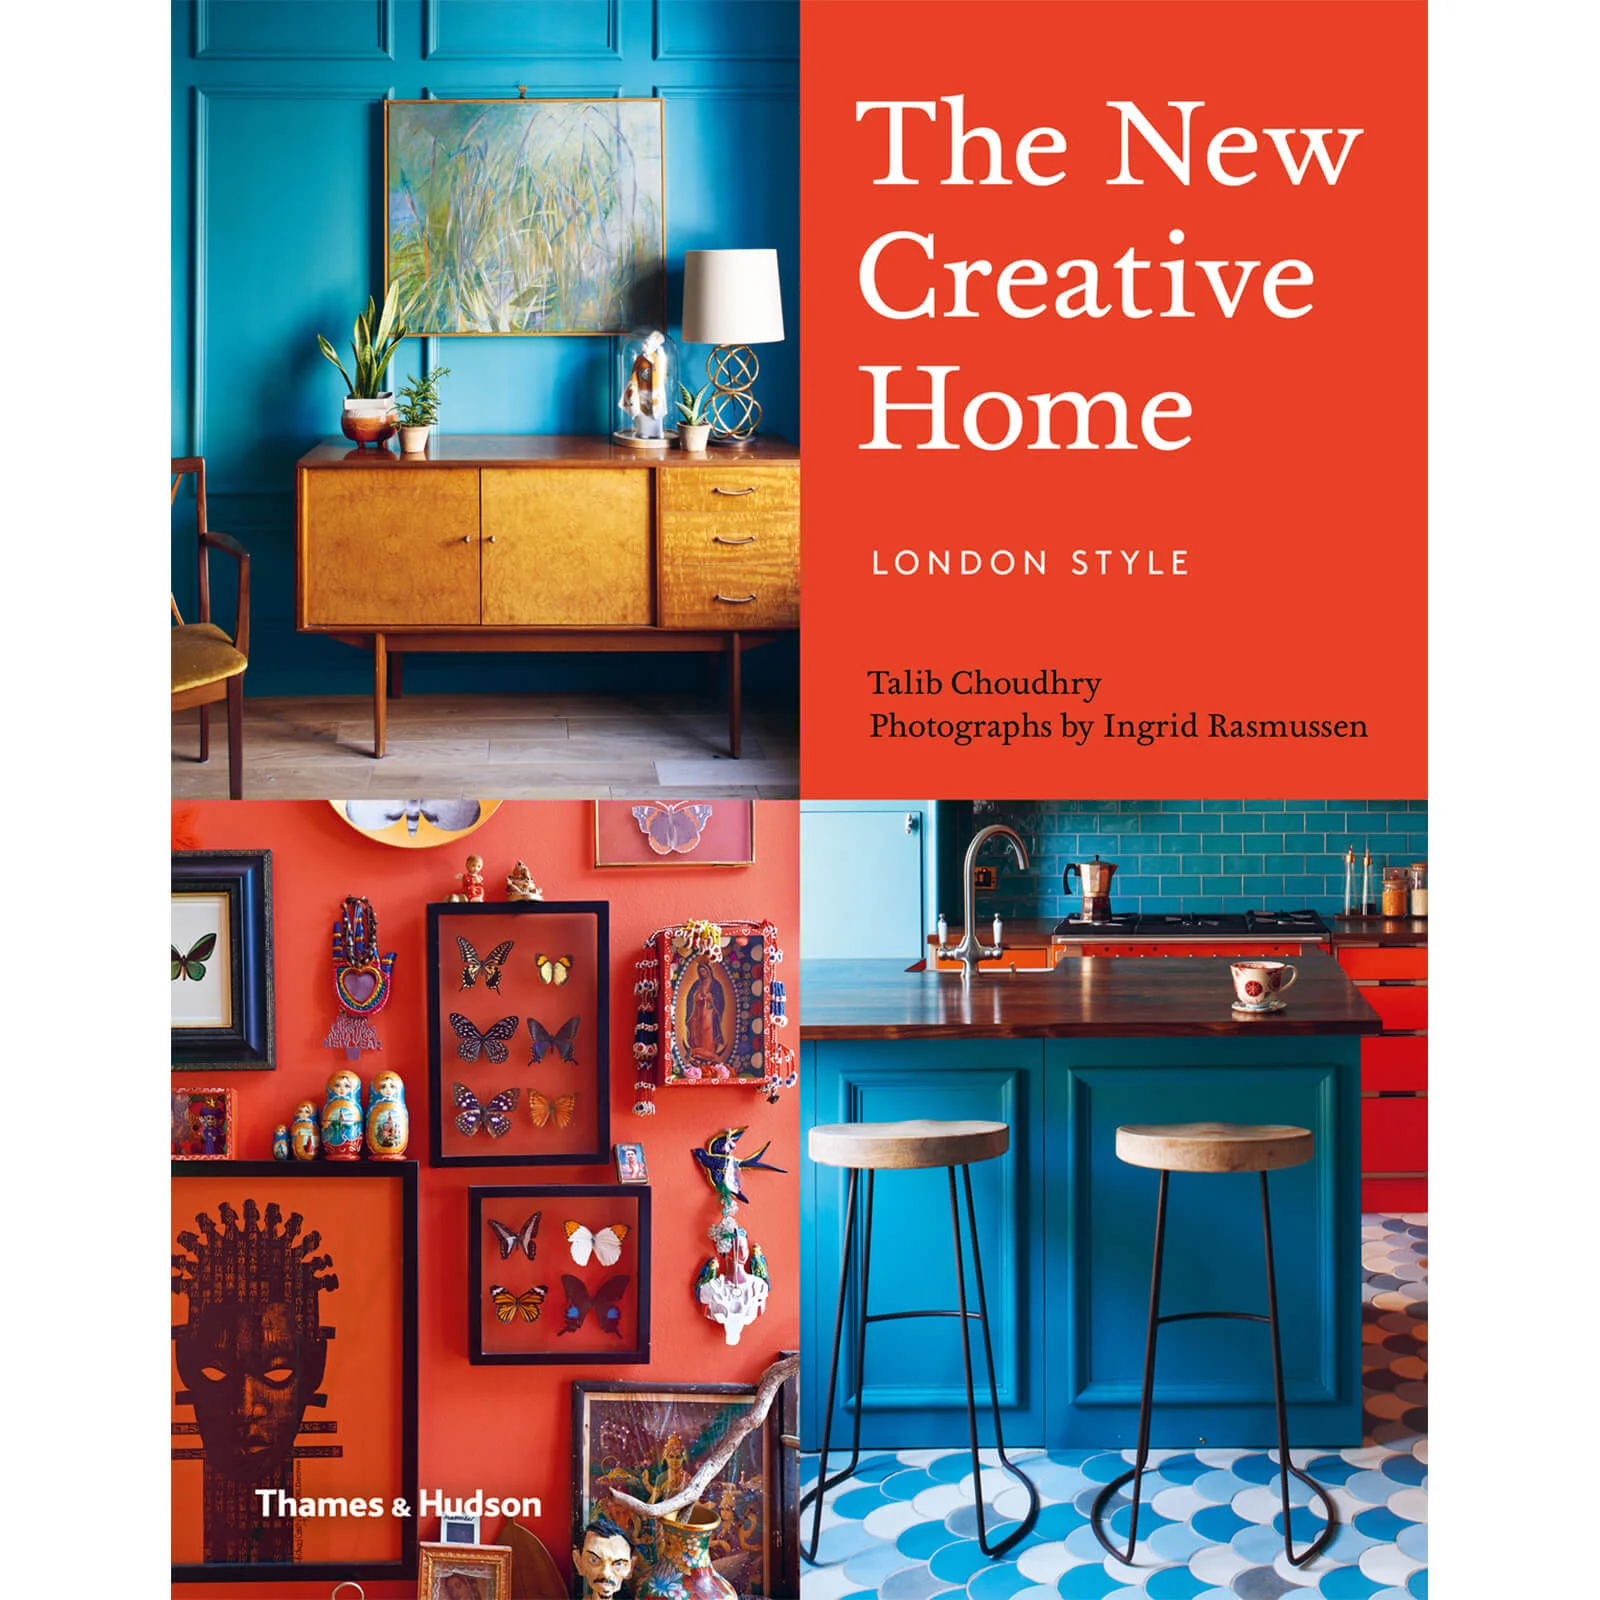 Thames and Hudson Ltd: The New Creative Home - London Style Image 1